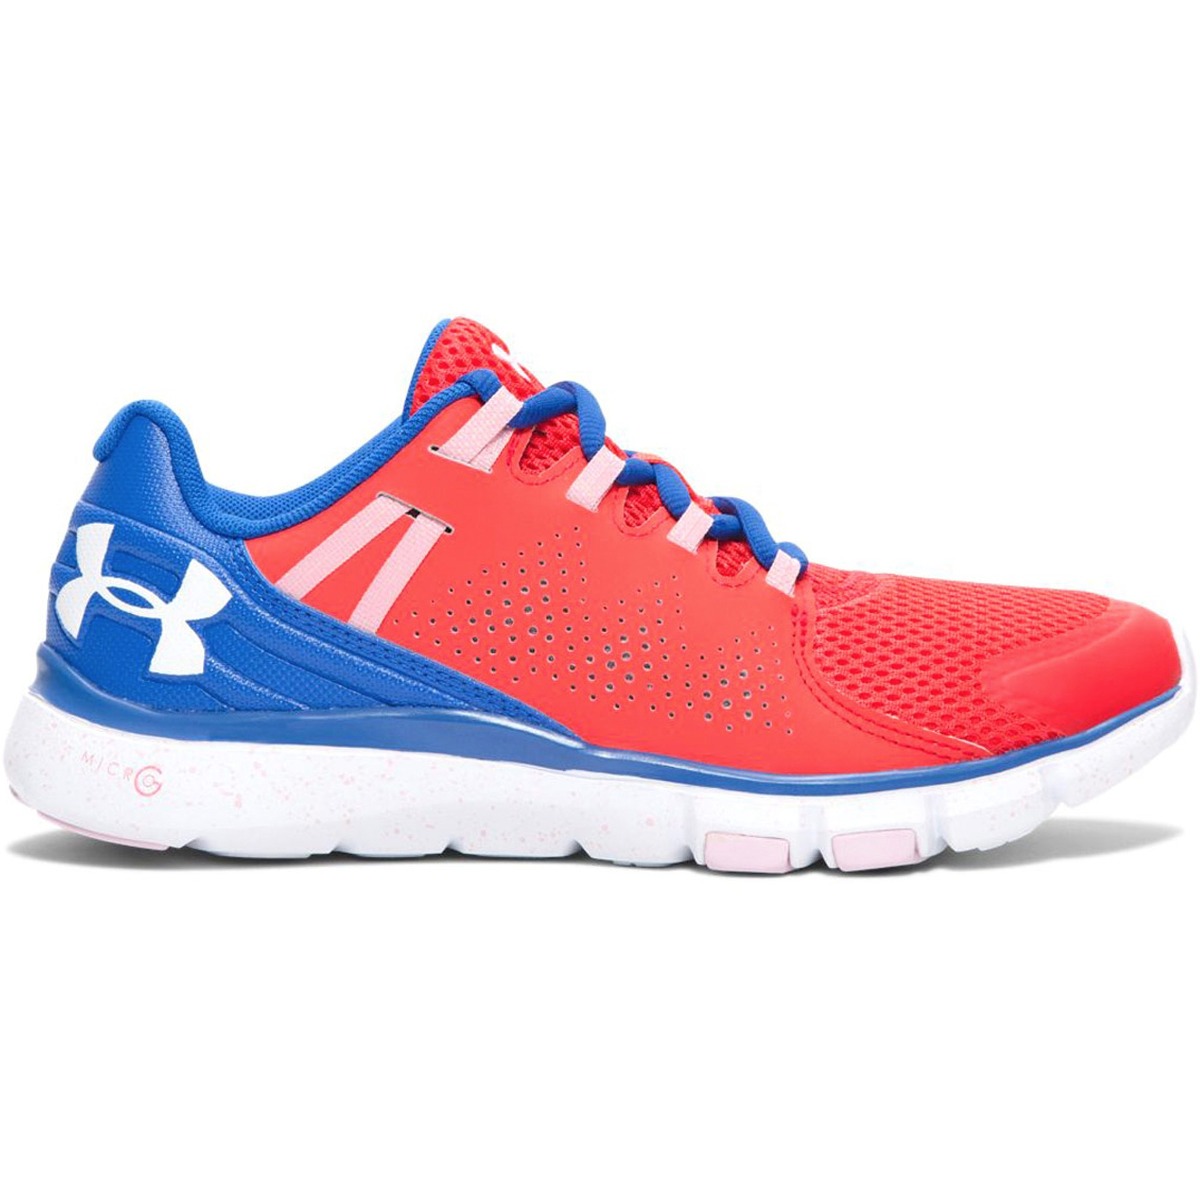 Tenis Atleticos Micro G Limitless Mujer Under Armour Ua820